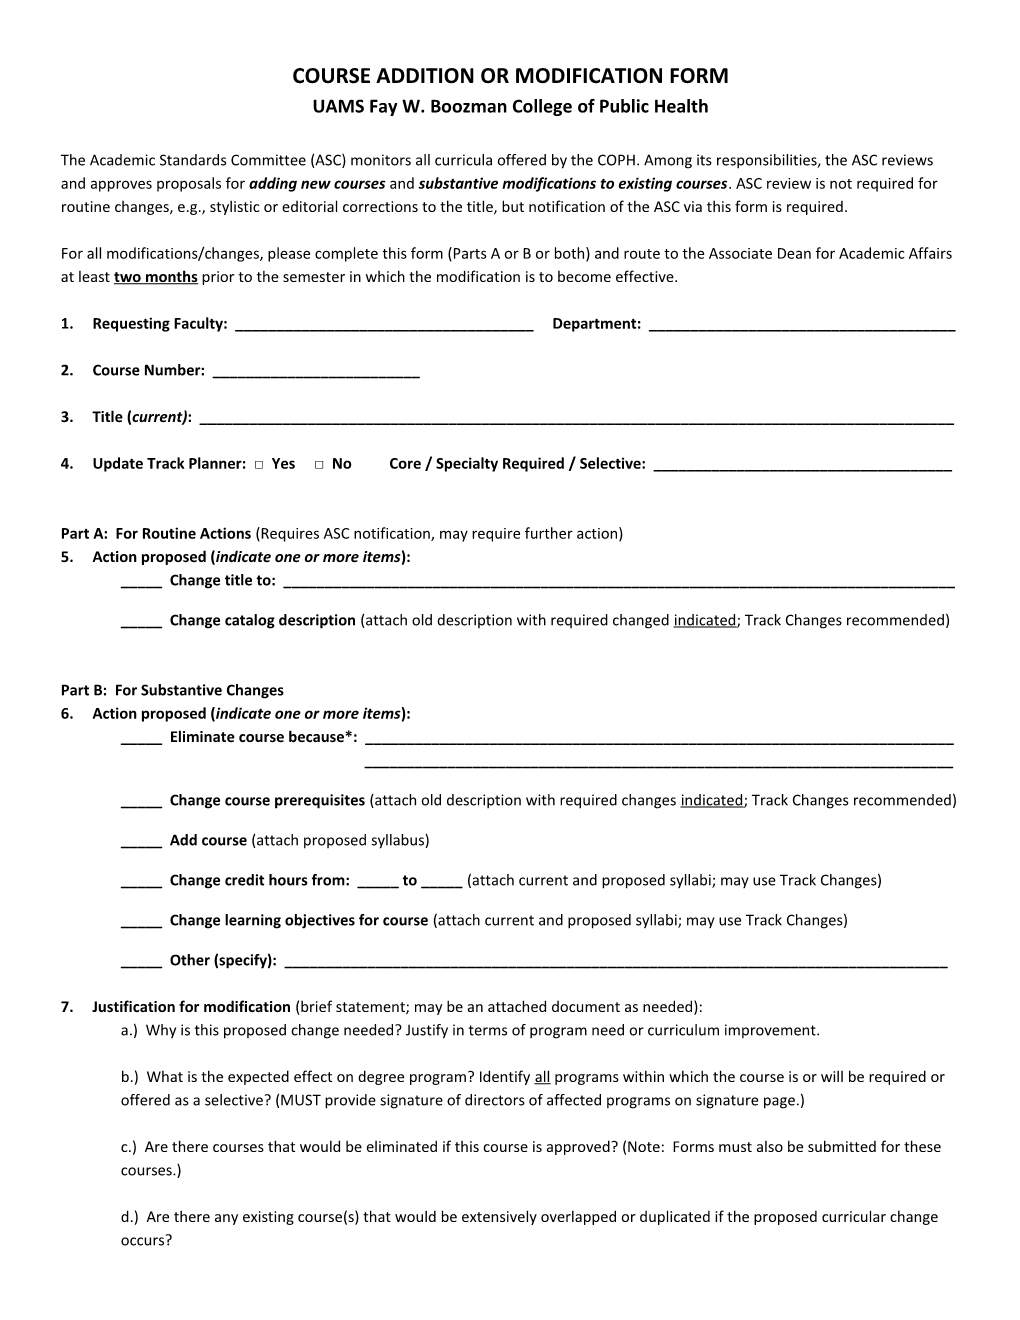 Course Addition Or Modification Form